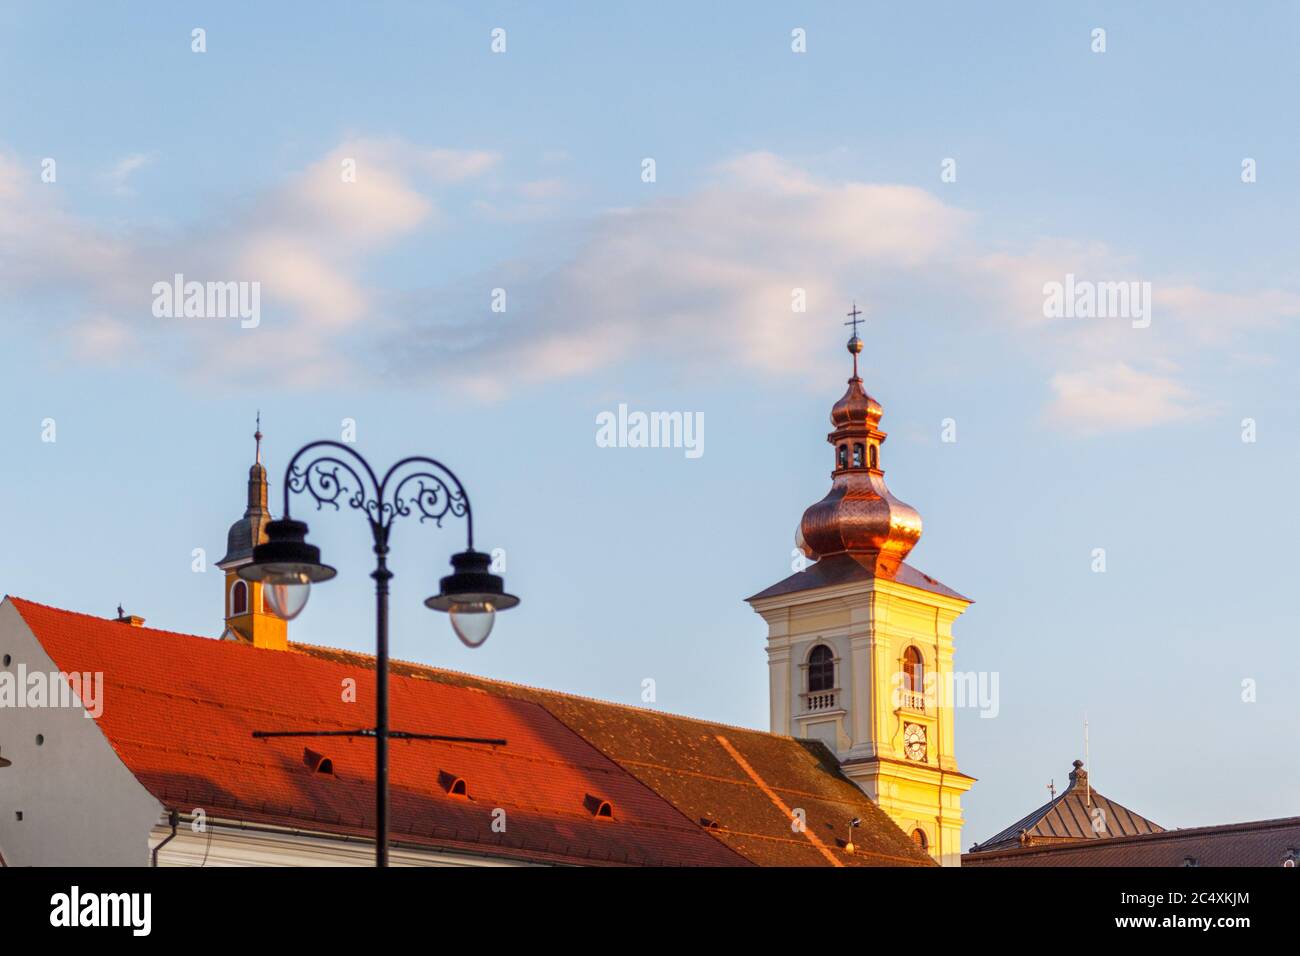 SIBIU, ROMANIA - Circa 2020: Old medieval town with cloudy blue sky. Beautiful tourist spot in eastern central Europe. Famous old medieval tower in Si Stock Photo